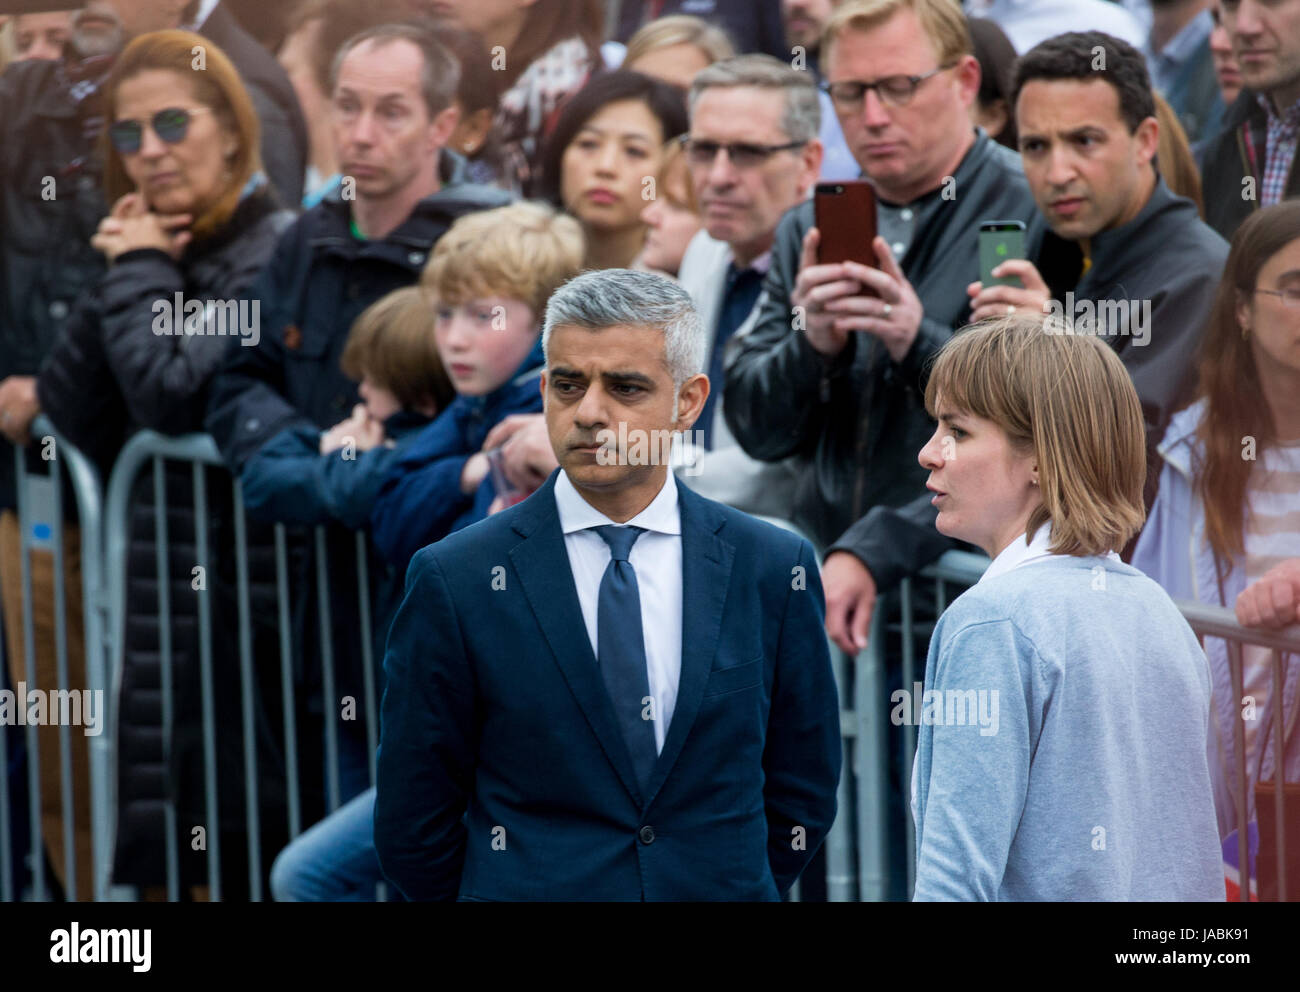 London, UK. 5th June, 2017. The vigil outside City Hall in memory of those who lost their lives and were injured during the attacks at London Bridge. Stock Photo